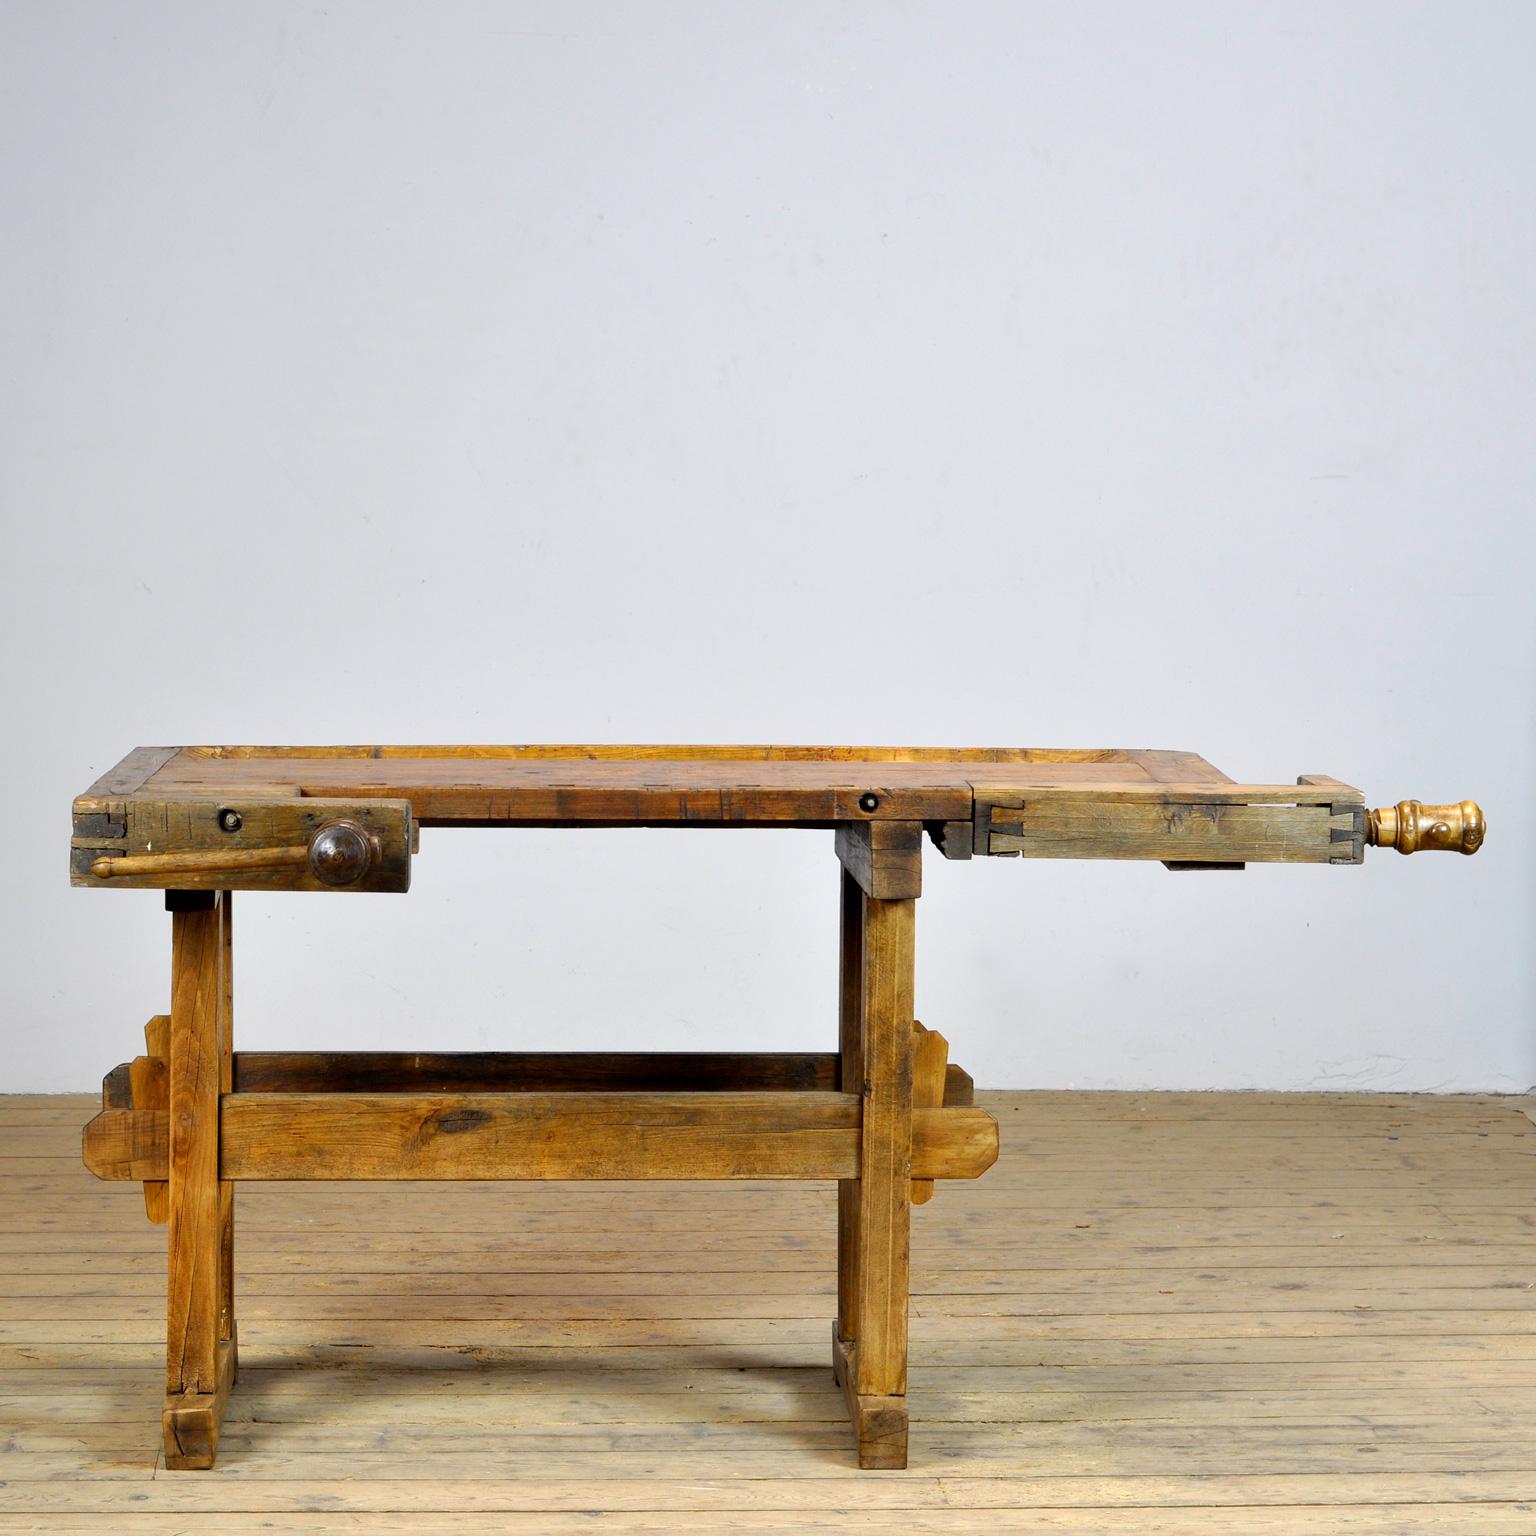 This antique workbench has two built-in wooden vise screws and a recessed tray where the carpenter would put his tools. It was manufactured around 1910. Made from oak. Beautiful patina after years of use. The workbench has been treated for woodworm,